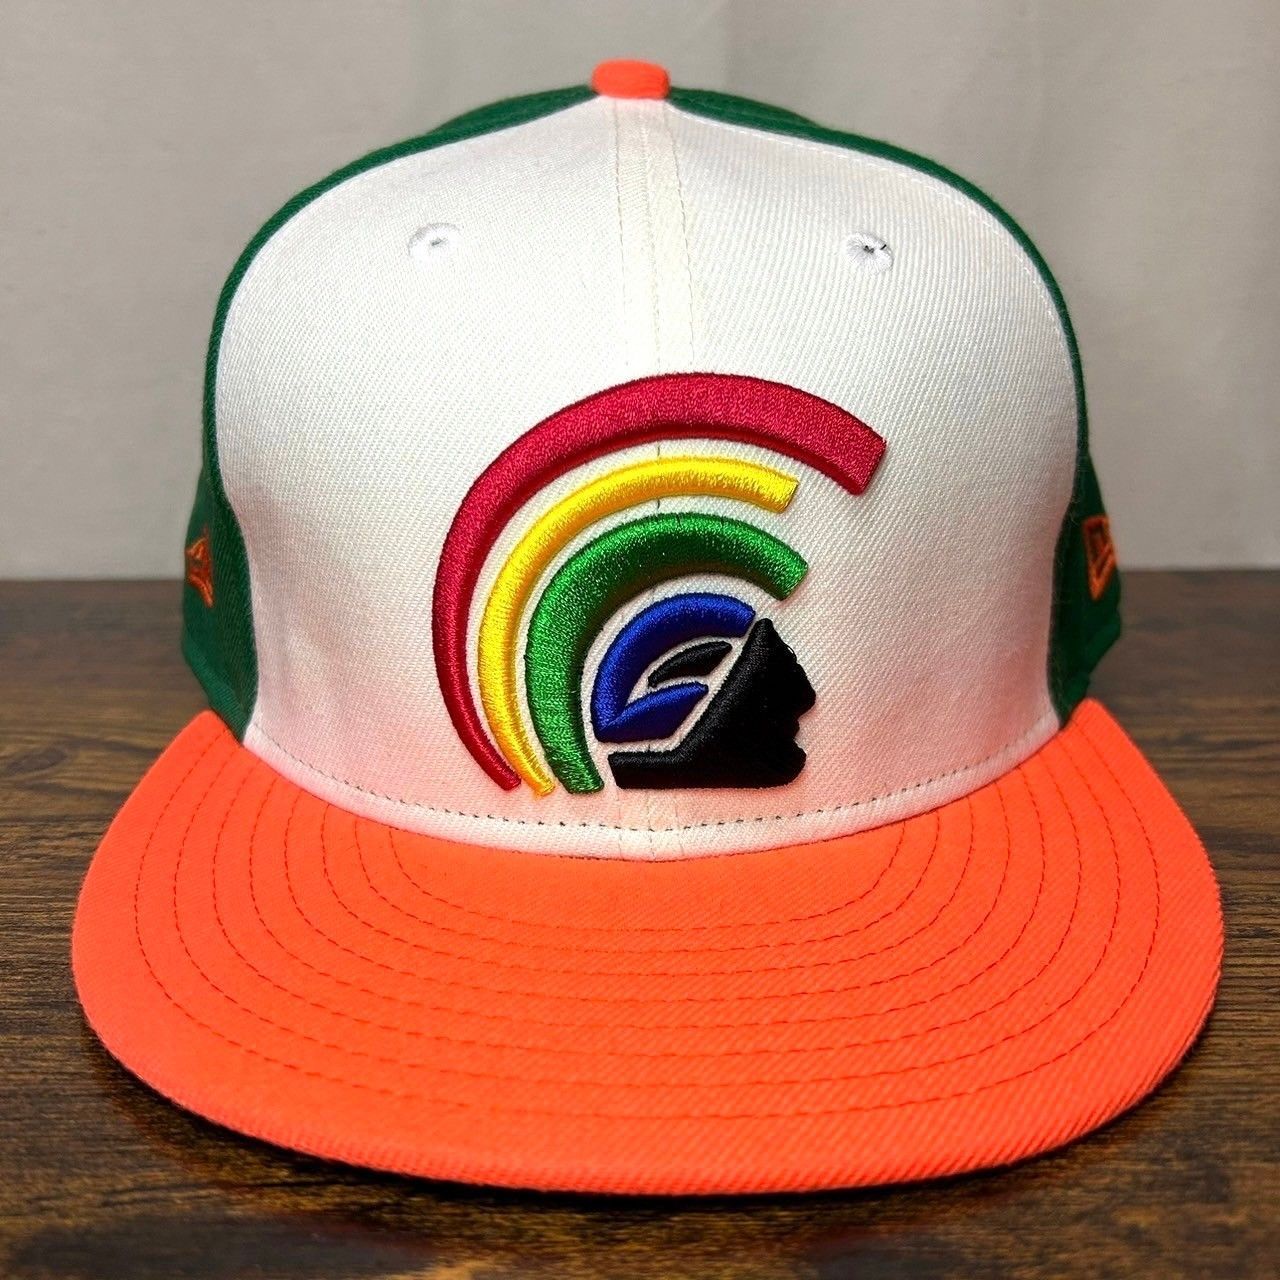 H-59 ニューエラ 59fifty FITTED Hawaii 激レア1050